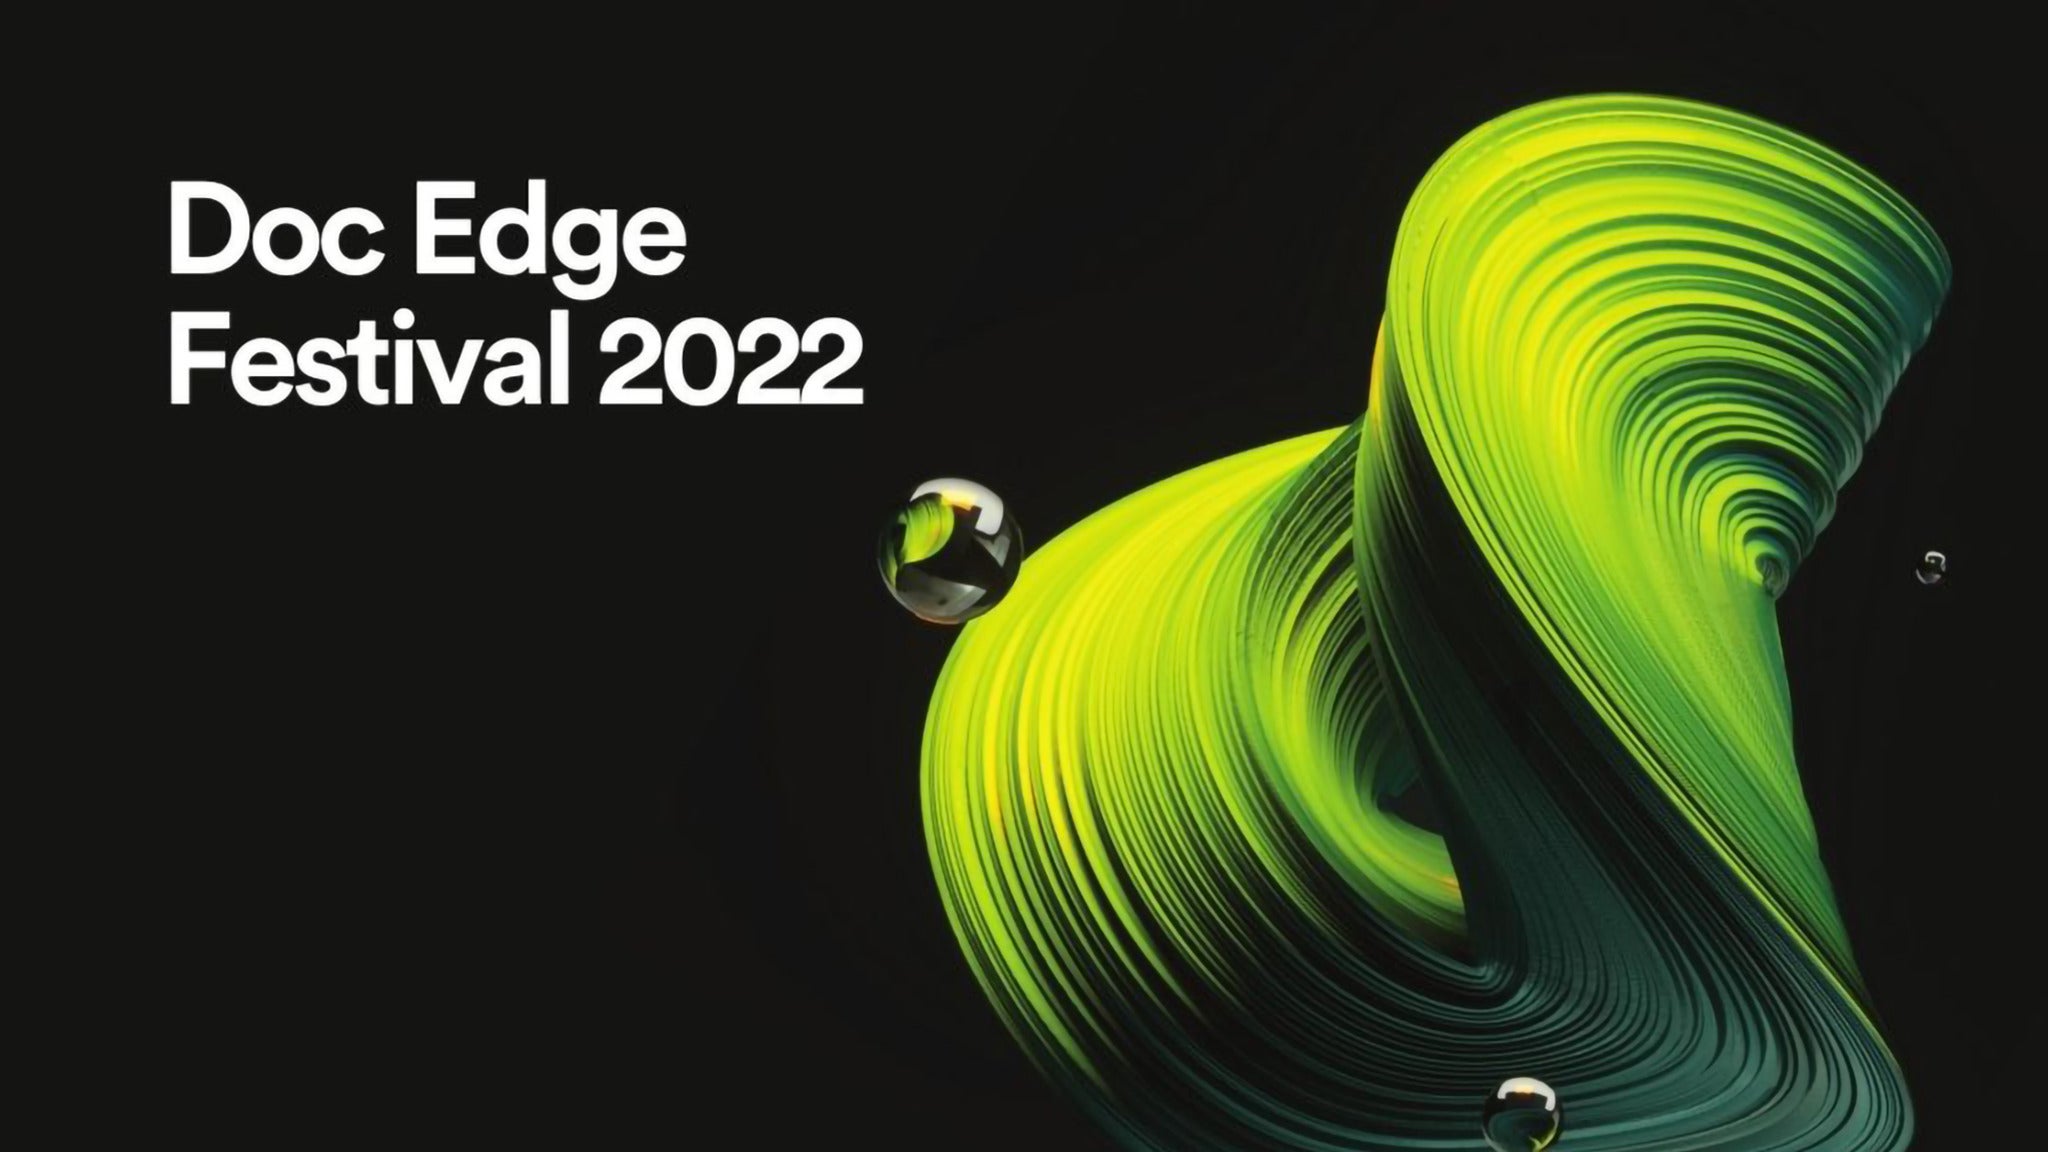 Image used with permission from Ticketmaster | Doc Edge Film Festival 2022: Take 10 Film Pass tickets